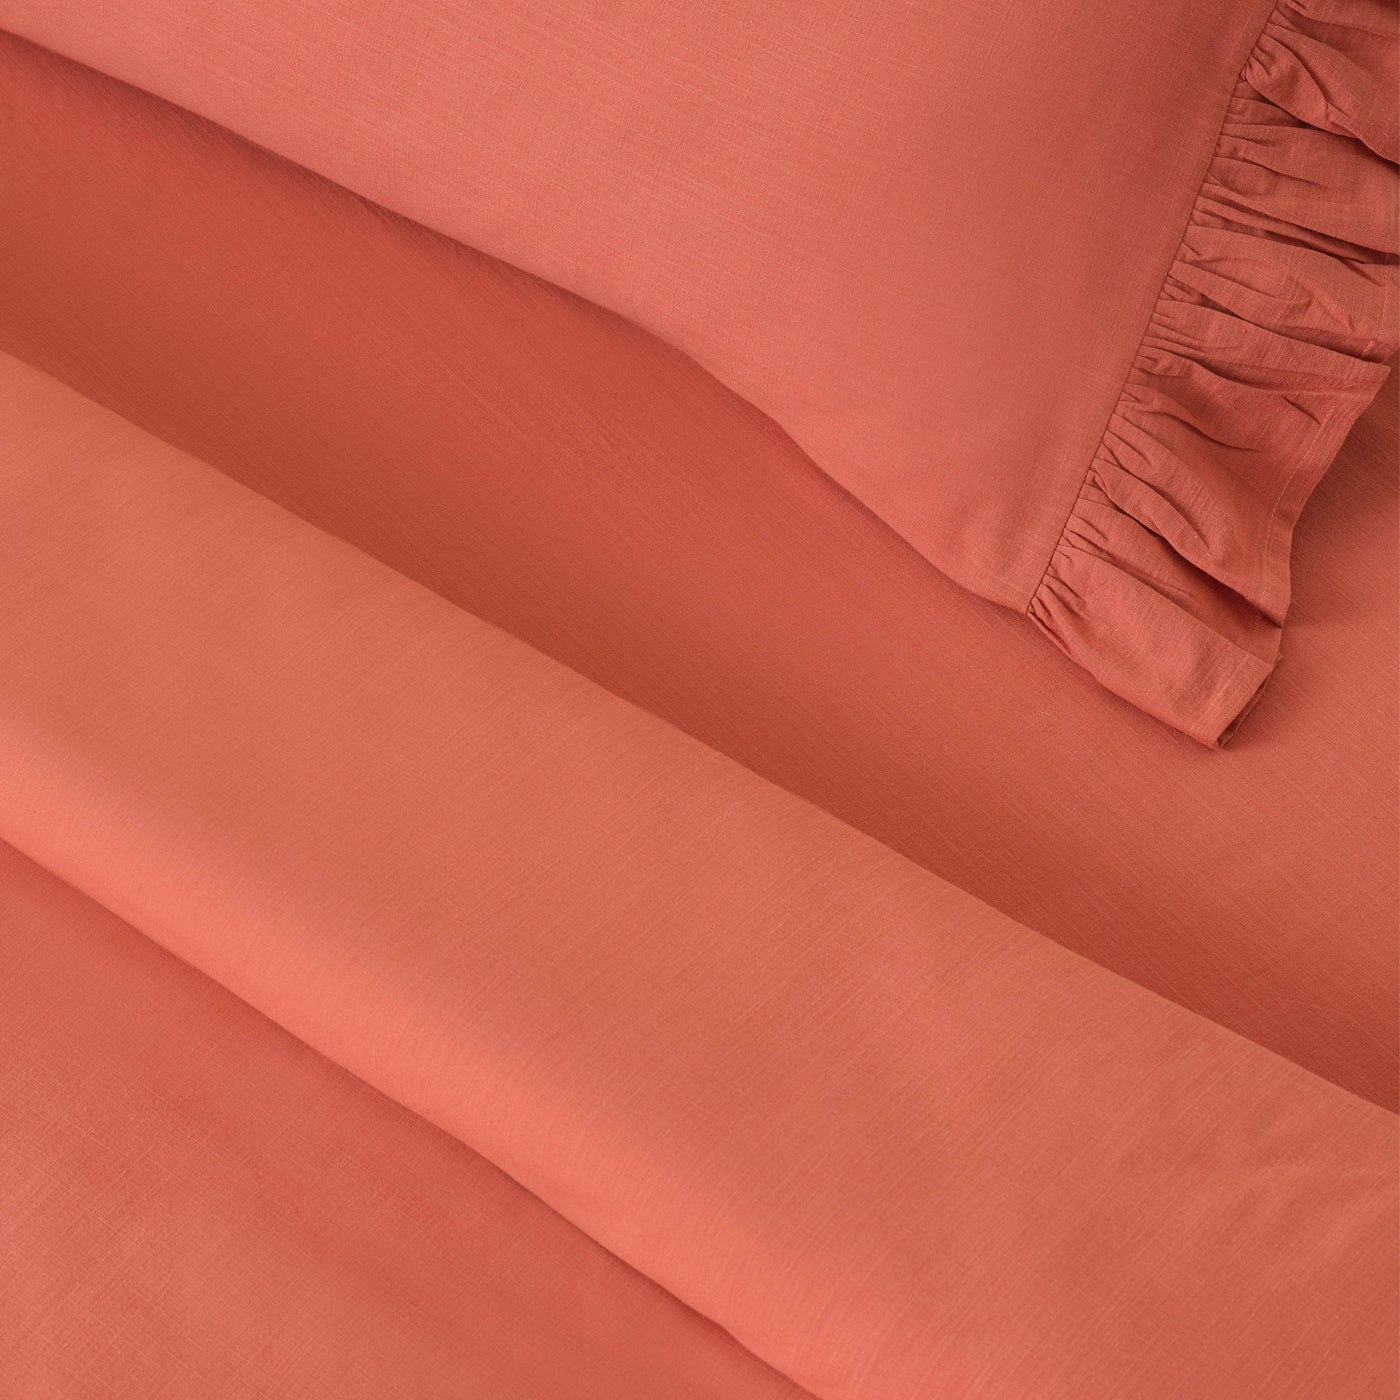 Ruby 100% Turkish Cotton Fitted Sheet, Terra, King Size Bed Sheets sazy.com